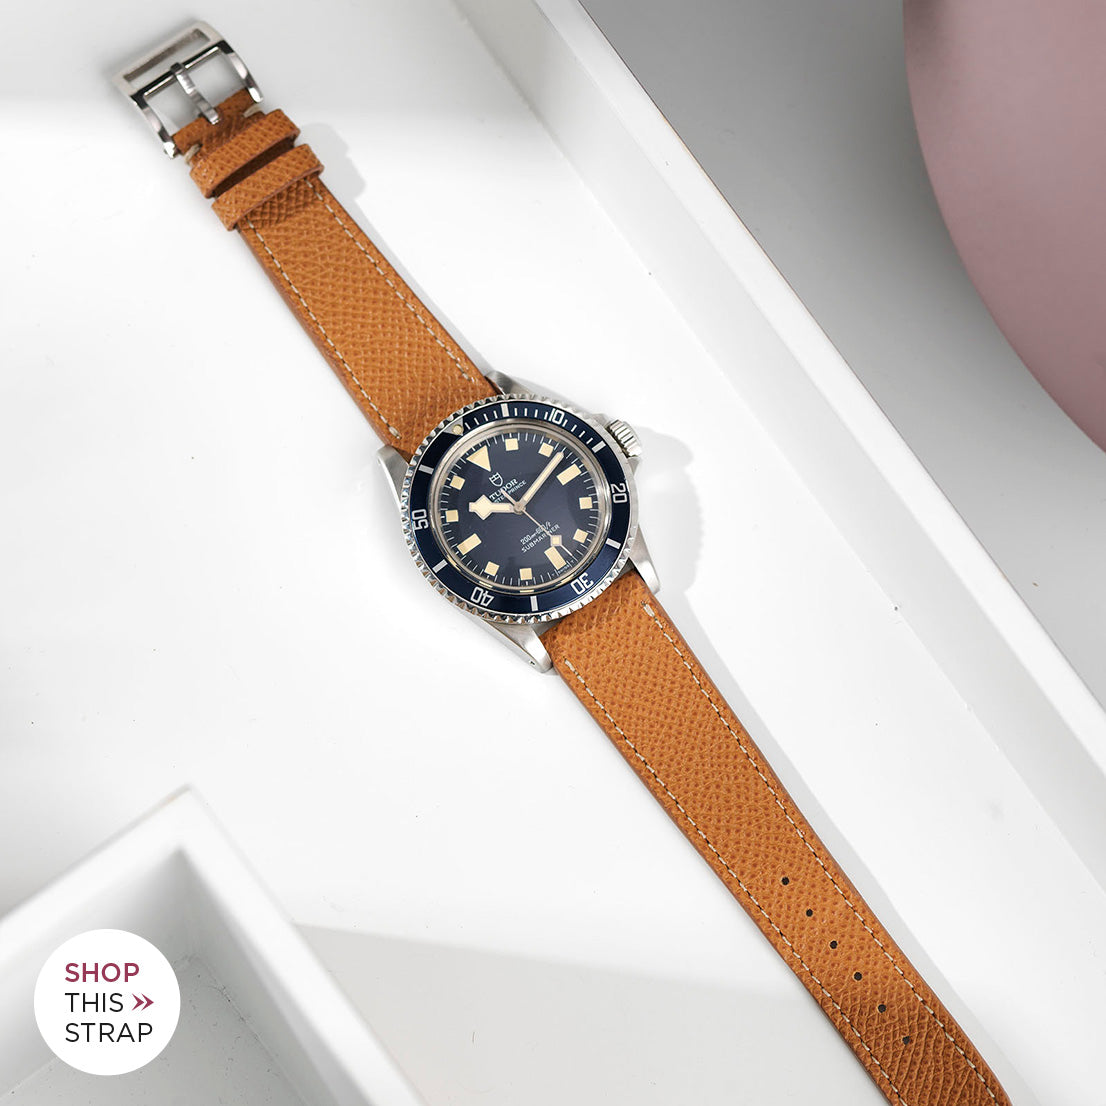 Bulang and Sons_Strap Guide_The Tudor Blue Snowflake_Cognac Brown Leather Watch Strap